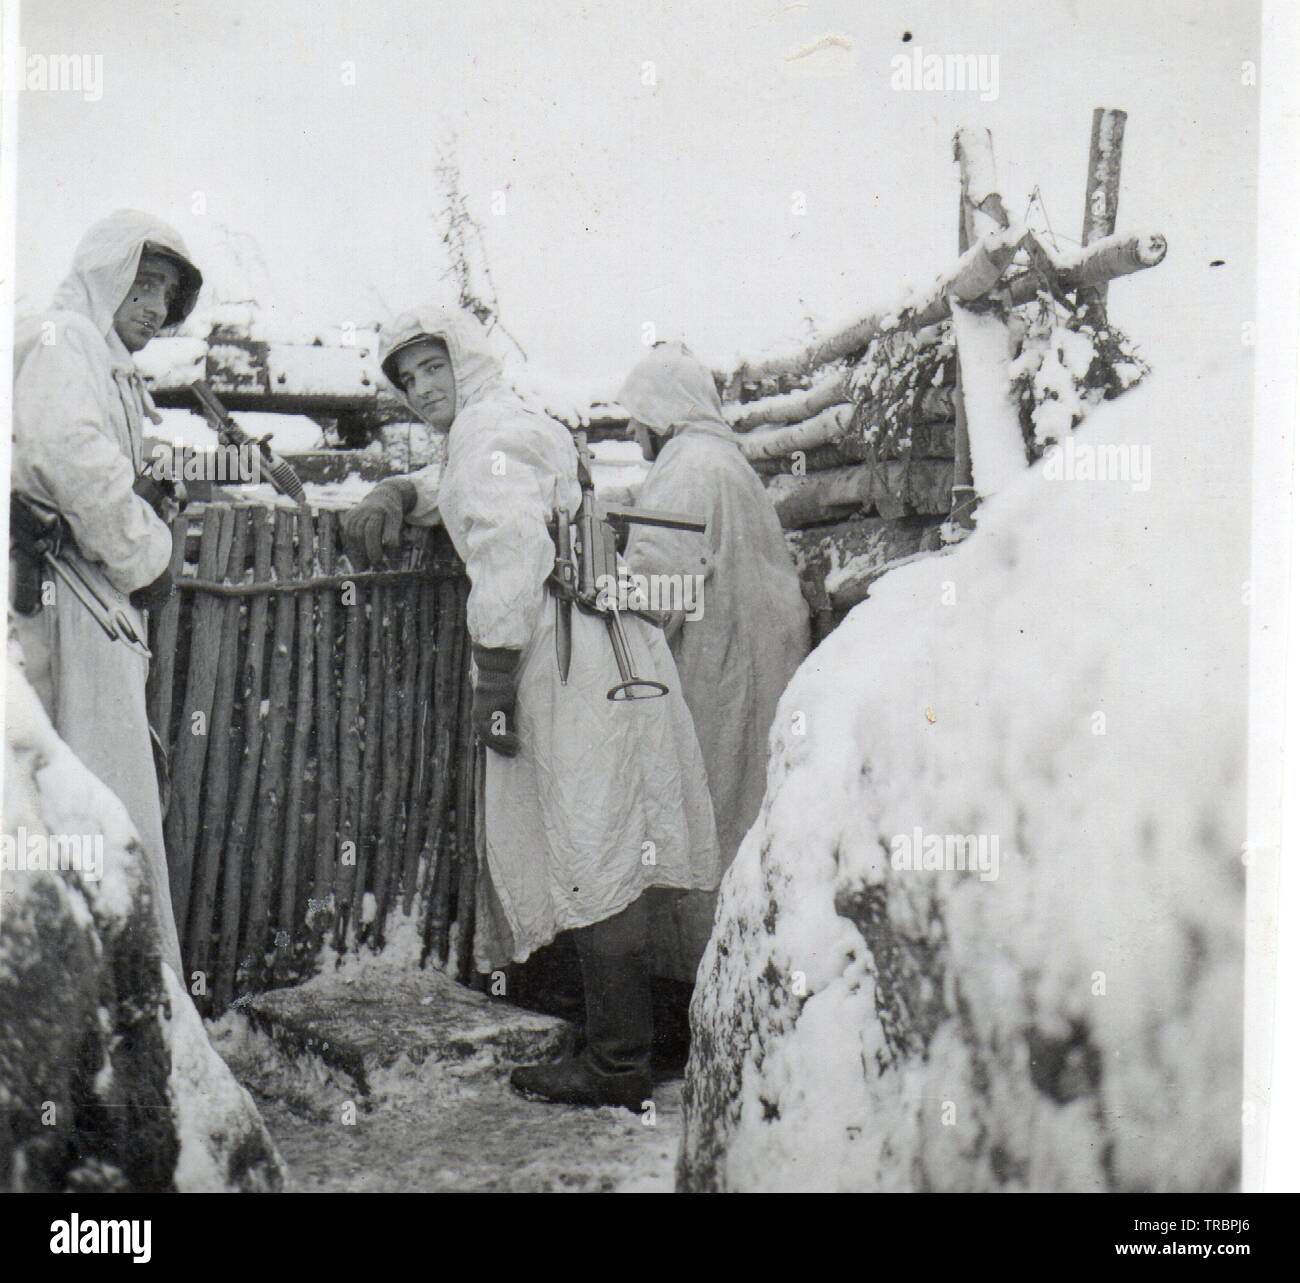 German Soldiers in Winter Camouflage clothing in a defensive position ...